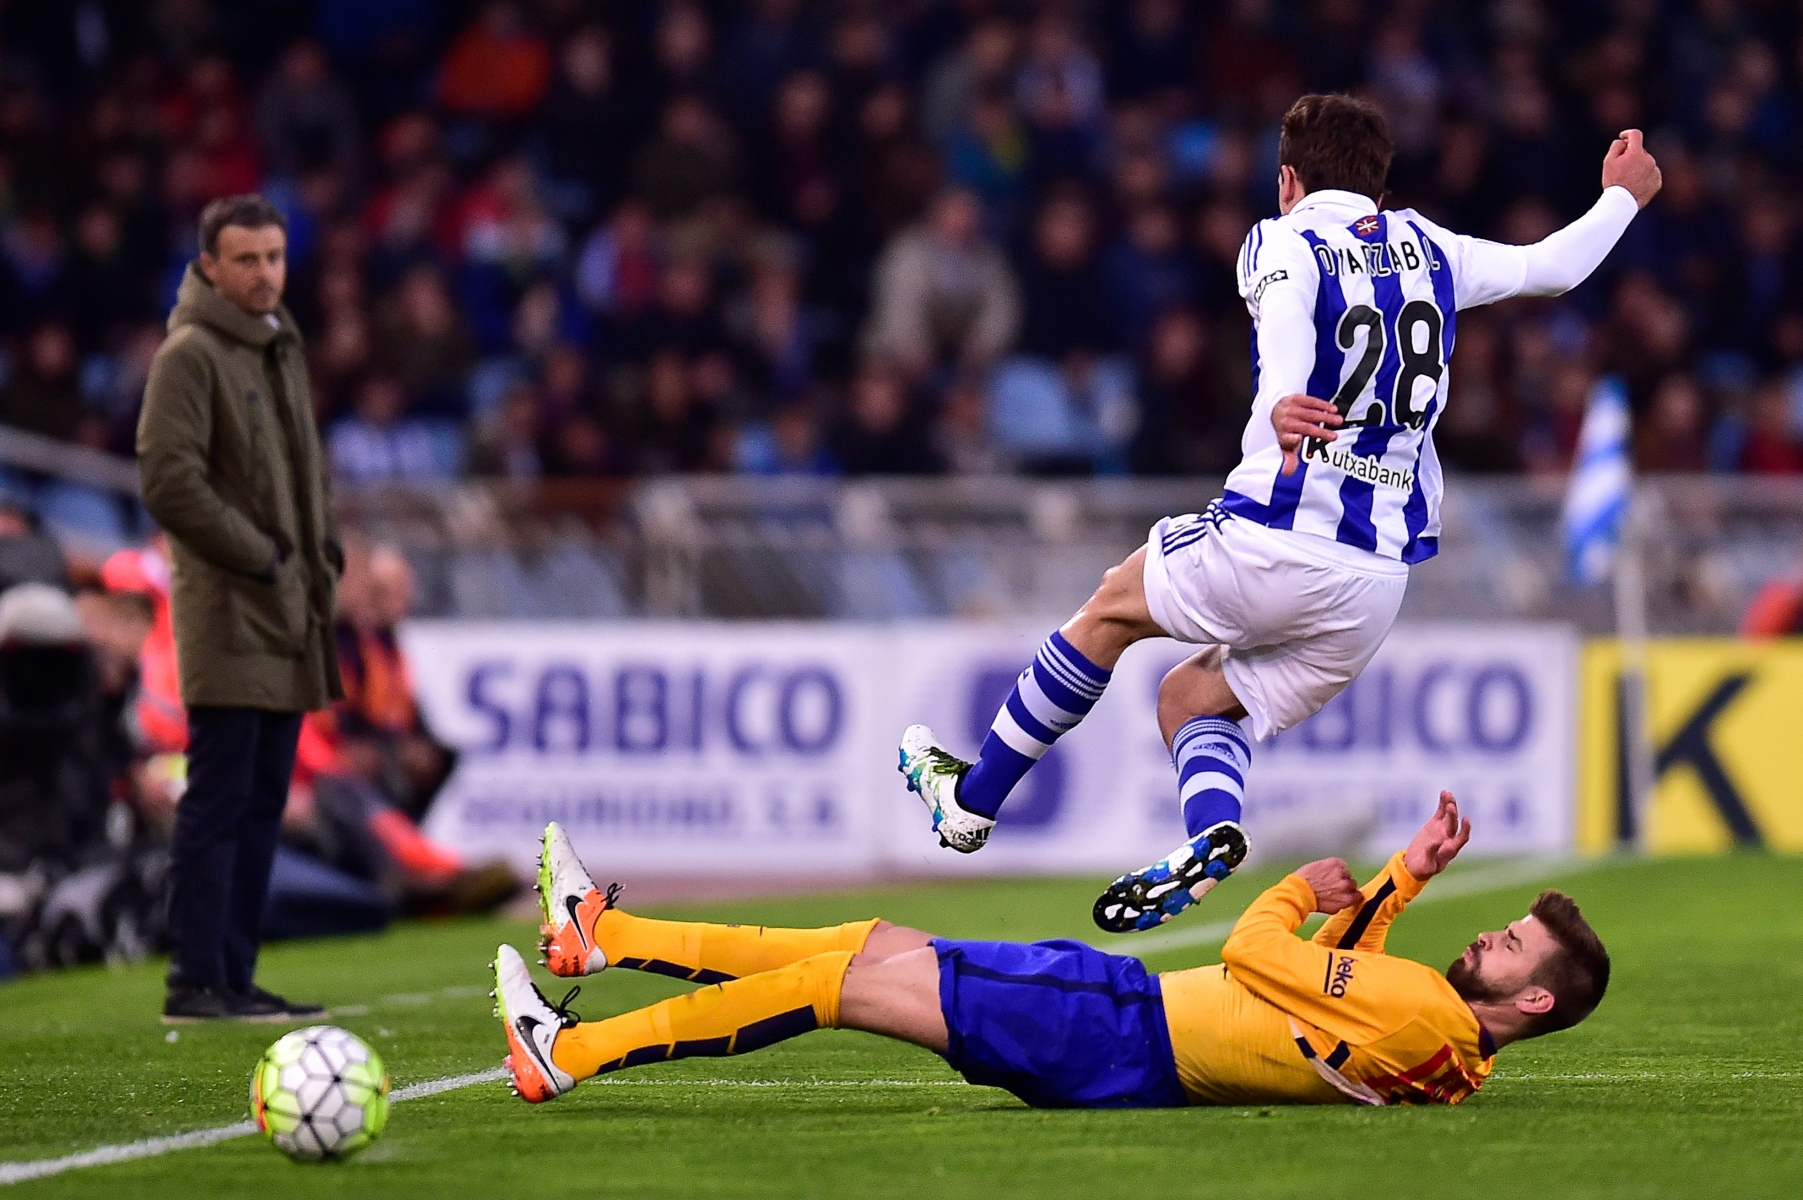 Barcelona's Gerard Pique, on the ground, duels for the ball with Real Sociedad's Mikel Oiarzabal, as head coach Luis Enrique, left, watches the action during their Spanish La Liga soccer match, at Anoeta stadium in San Sebastian, northern Spain, Saturday, April 9, 2016. (AP Photo/Alvaro Barrientos) Spain Soccer La Liga